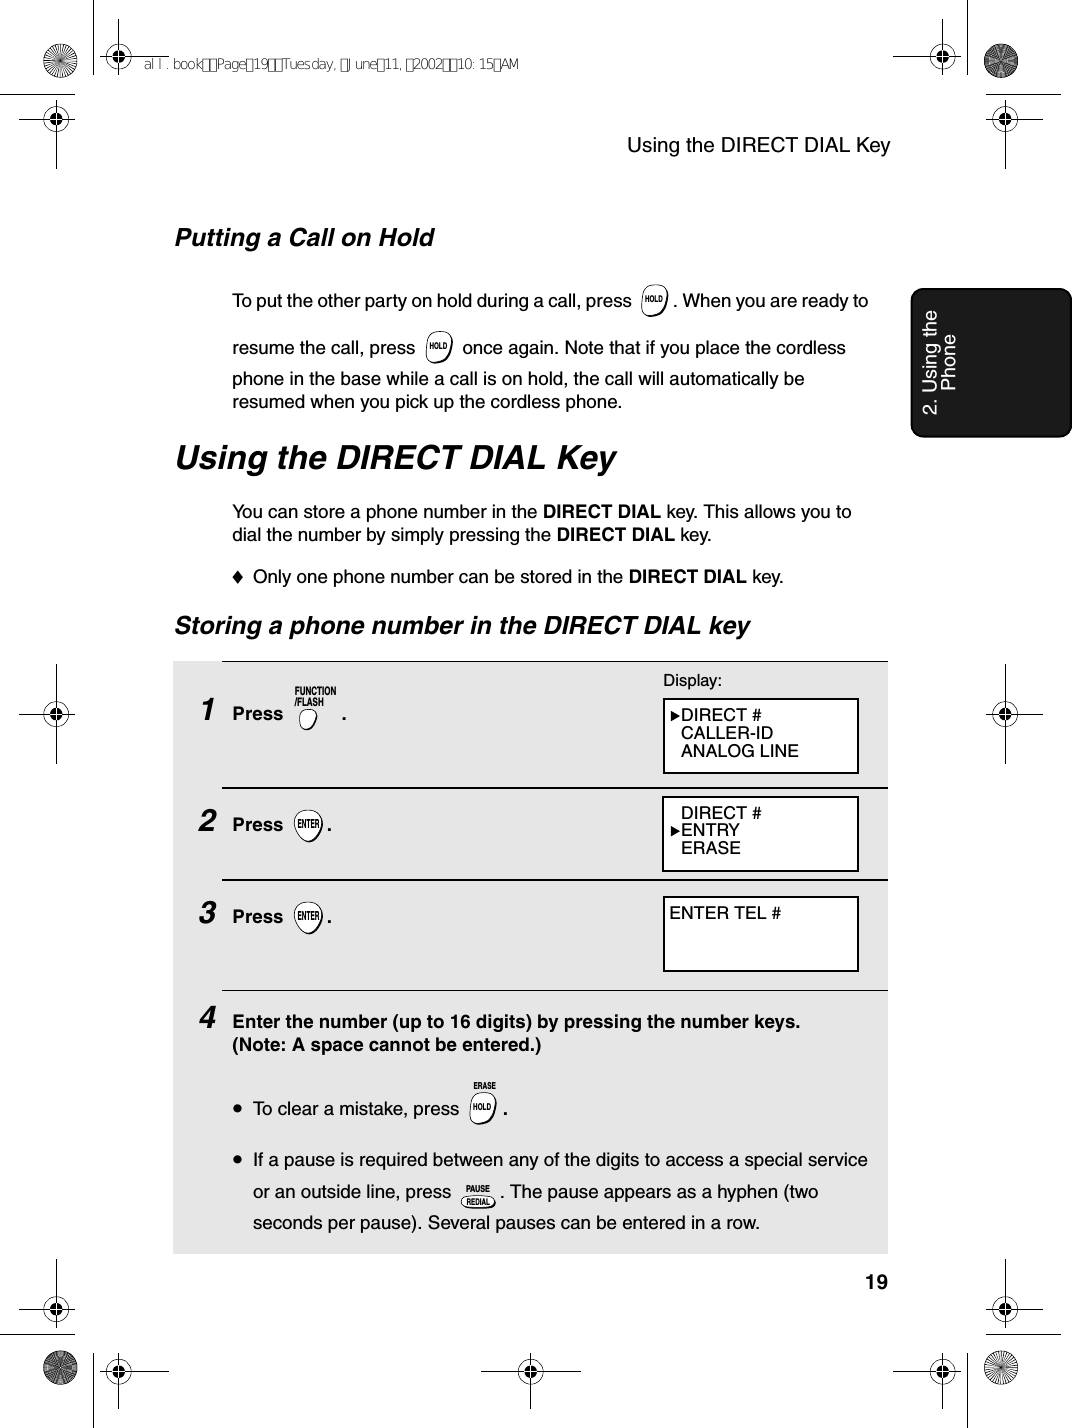 Using the DIRECT DIAL Key192. Using the PhoneUsing the DIRECT DIAL KeyYou can store a phone number in the DIRECT DIAL key. This allows you to dial the number by simply pressing the DIRECT DIAL key.♦Only one phone number can be stored in the DIRECT DIAL key.Storing a phone number in the DIRECT DIAL key1Press . 2Press .3Press .4    Enter the number (up to 16 digits) by pressing the number keys. (Note: A space cannot be entered.)•To clear a mistake, press  .•If a pause is required between any of the digits to access a special service or an outside line, press  . The pause appears as a hyphen (two seconds per pause). Several pauses can be entered in a row.FUNCTION/FLASHENTERENTERHOLDERASEREDIALPAUSEDisplay:DIRECT #CALLER-IDANALOG LINEDIRECT #ENTRYERASEENTER TEL #Putting a Call on HoldTo put the other party on hold during a call, press  . When you are ready to resume the call, press   once again. Note that if you place the cordless phone in the base while a call is on hold, the call will automatically be resumed when you pick up the cordless phone.HOLDHOLDall.bookPage19Tuesday,June11,200210:15AM